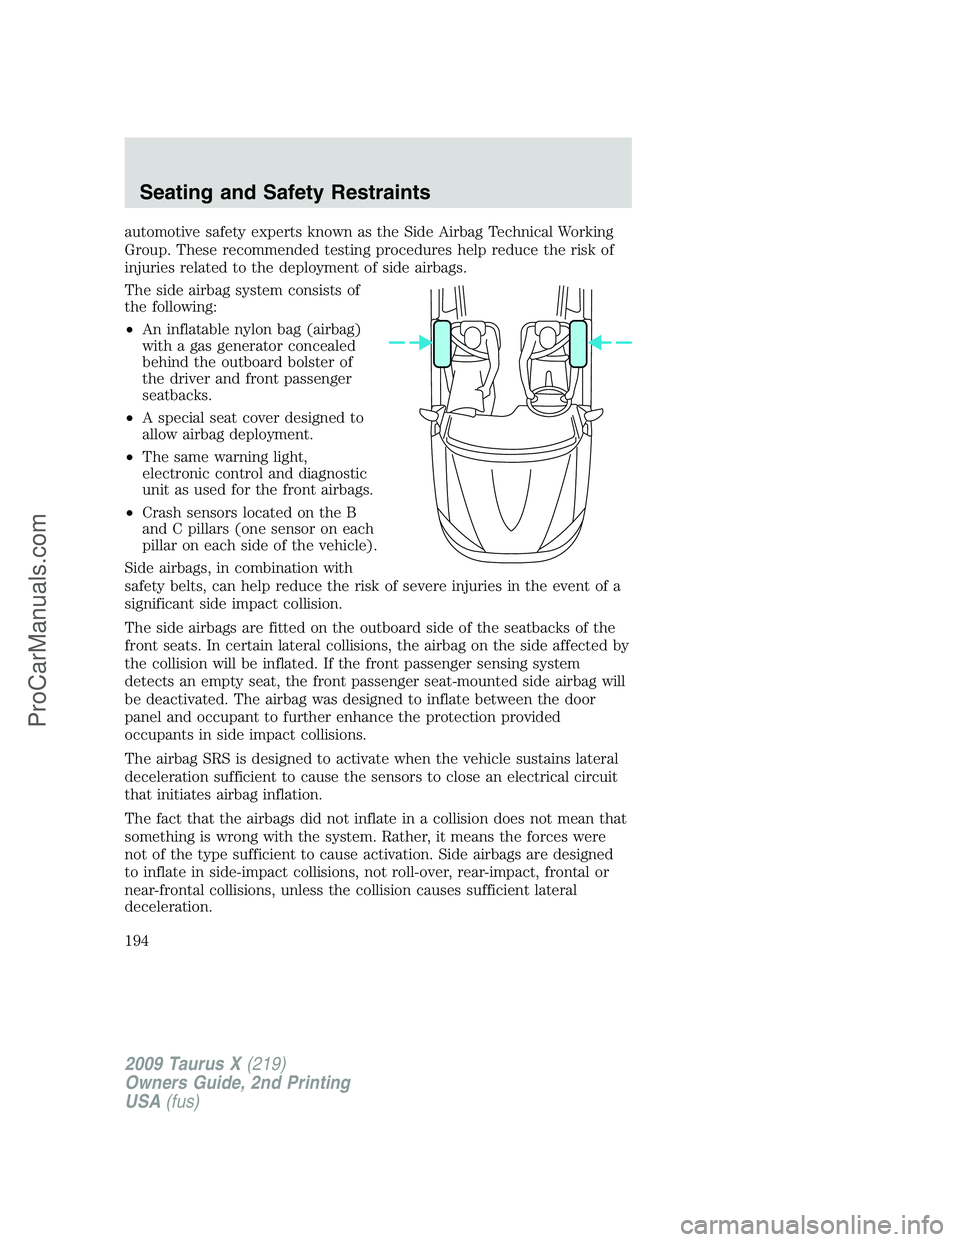 FORD FREESTYLE 2009  Owners Manual automotive safety experts known as the Side Airbag Technical Working
Group. These recommended testing procedures help reduce the risk of
injuries related to the deployment of side airbags.
The side ai